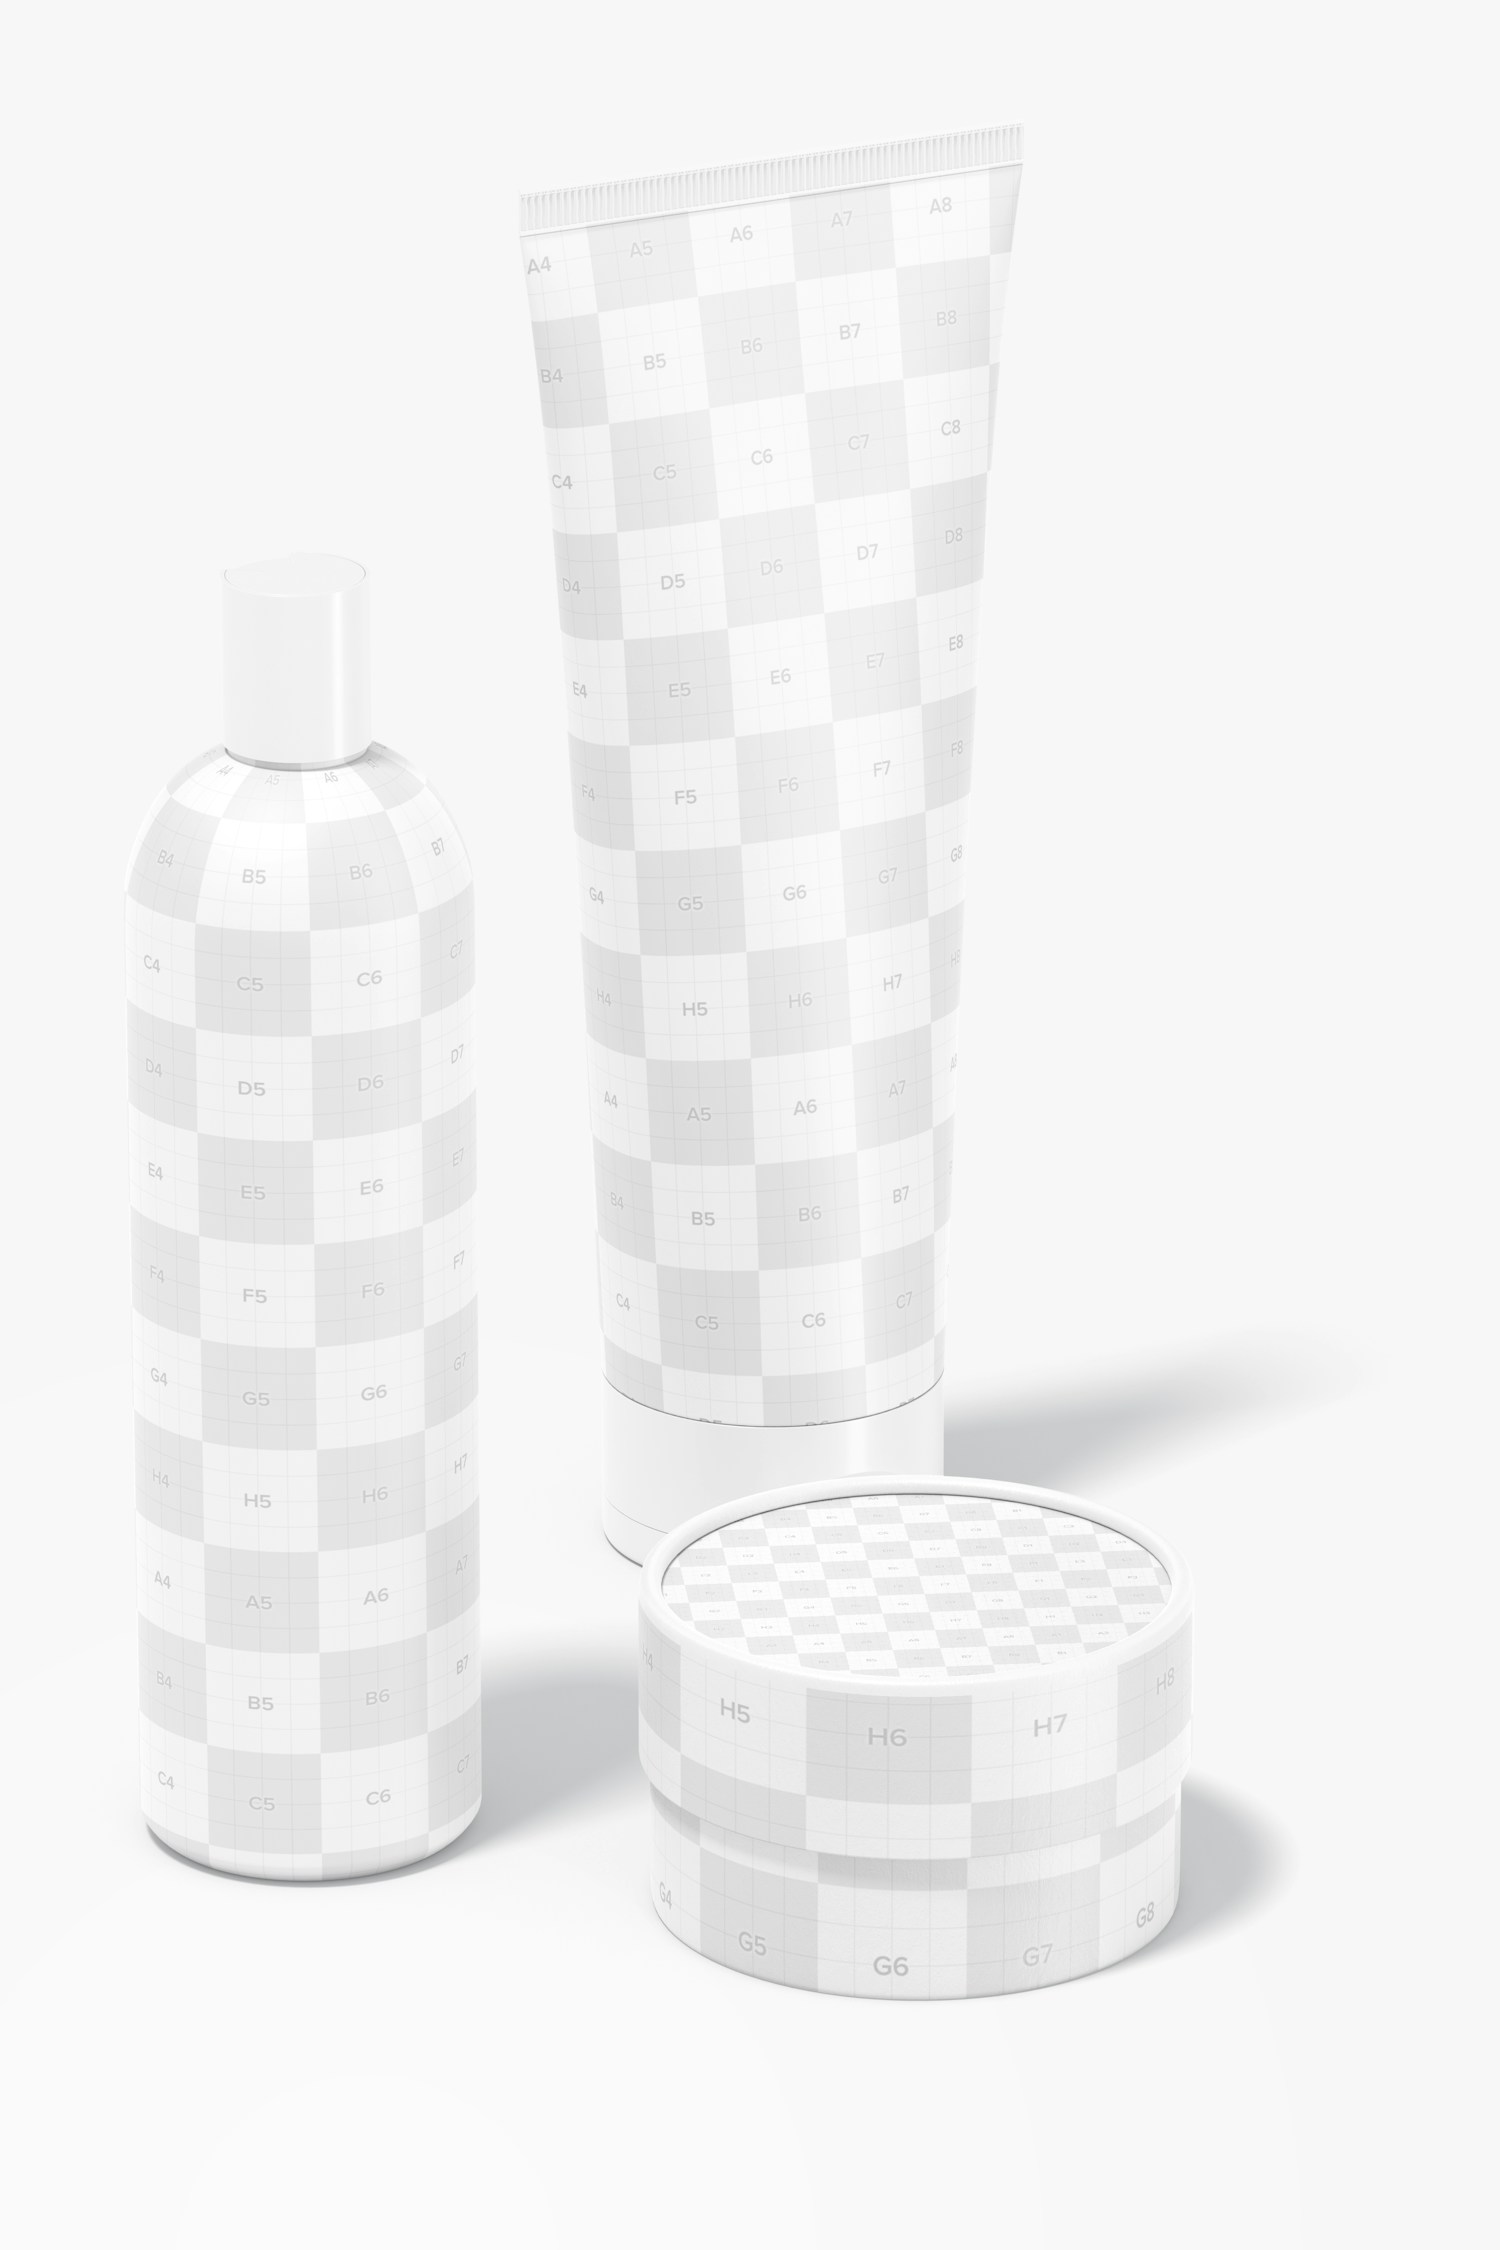 Body Care Products Scene Mockup, Perspective